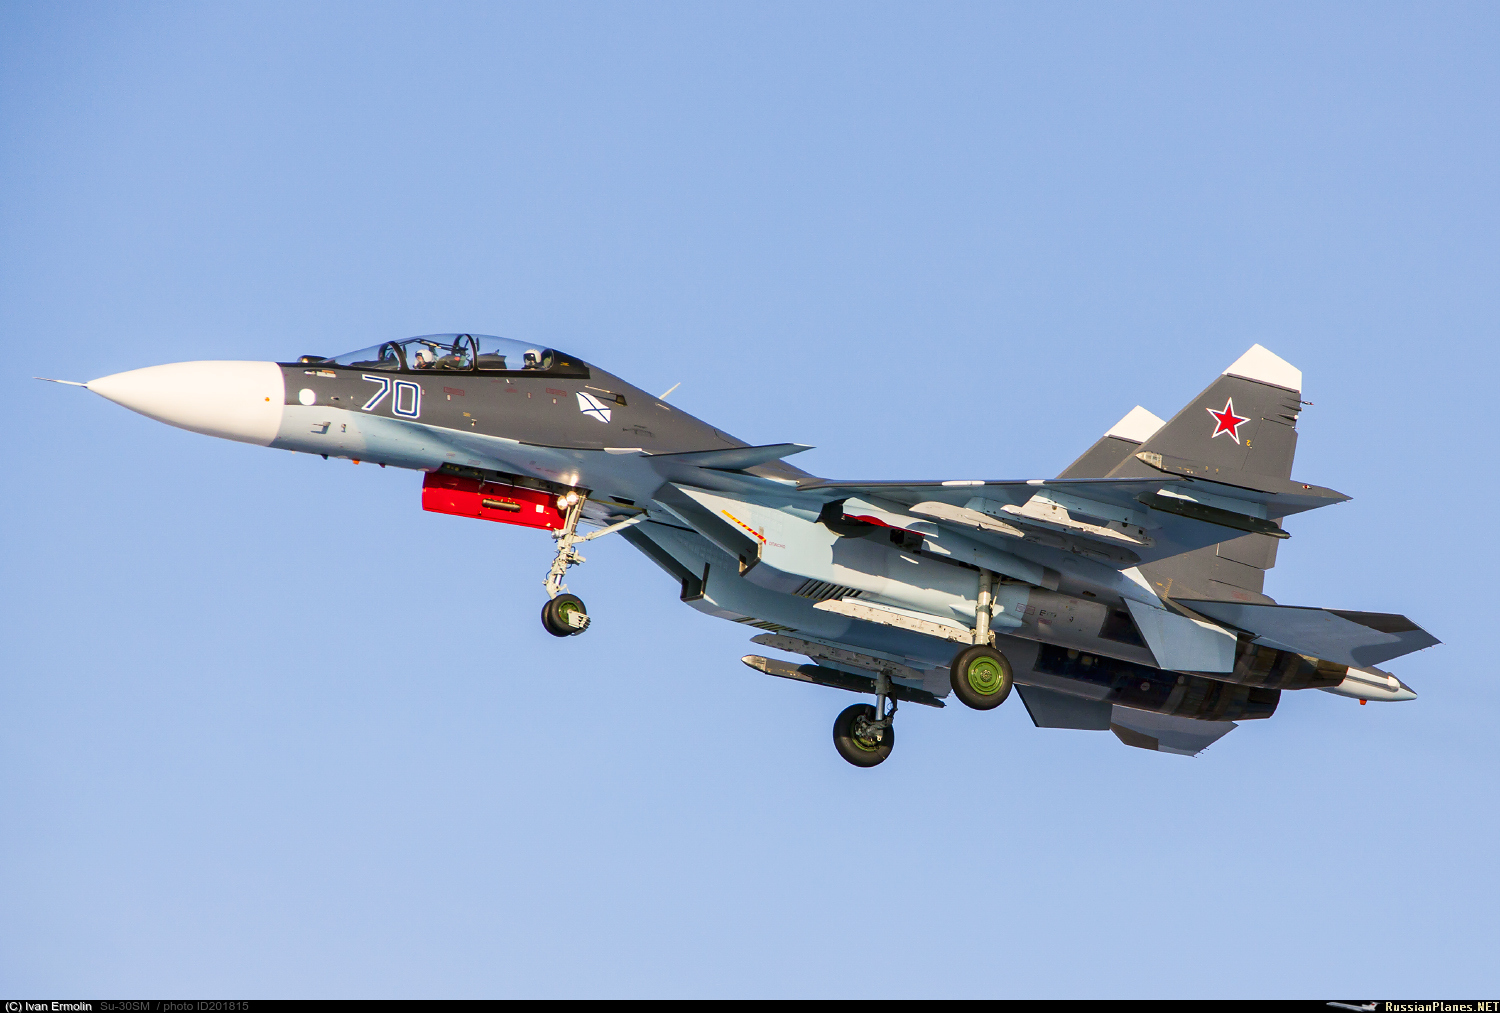 Russian Navy Baltic Fleet’s air arm received its first Su-30SM fighter jet